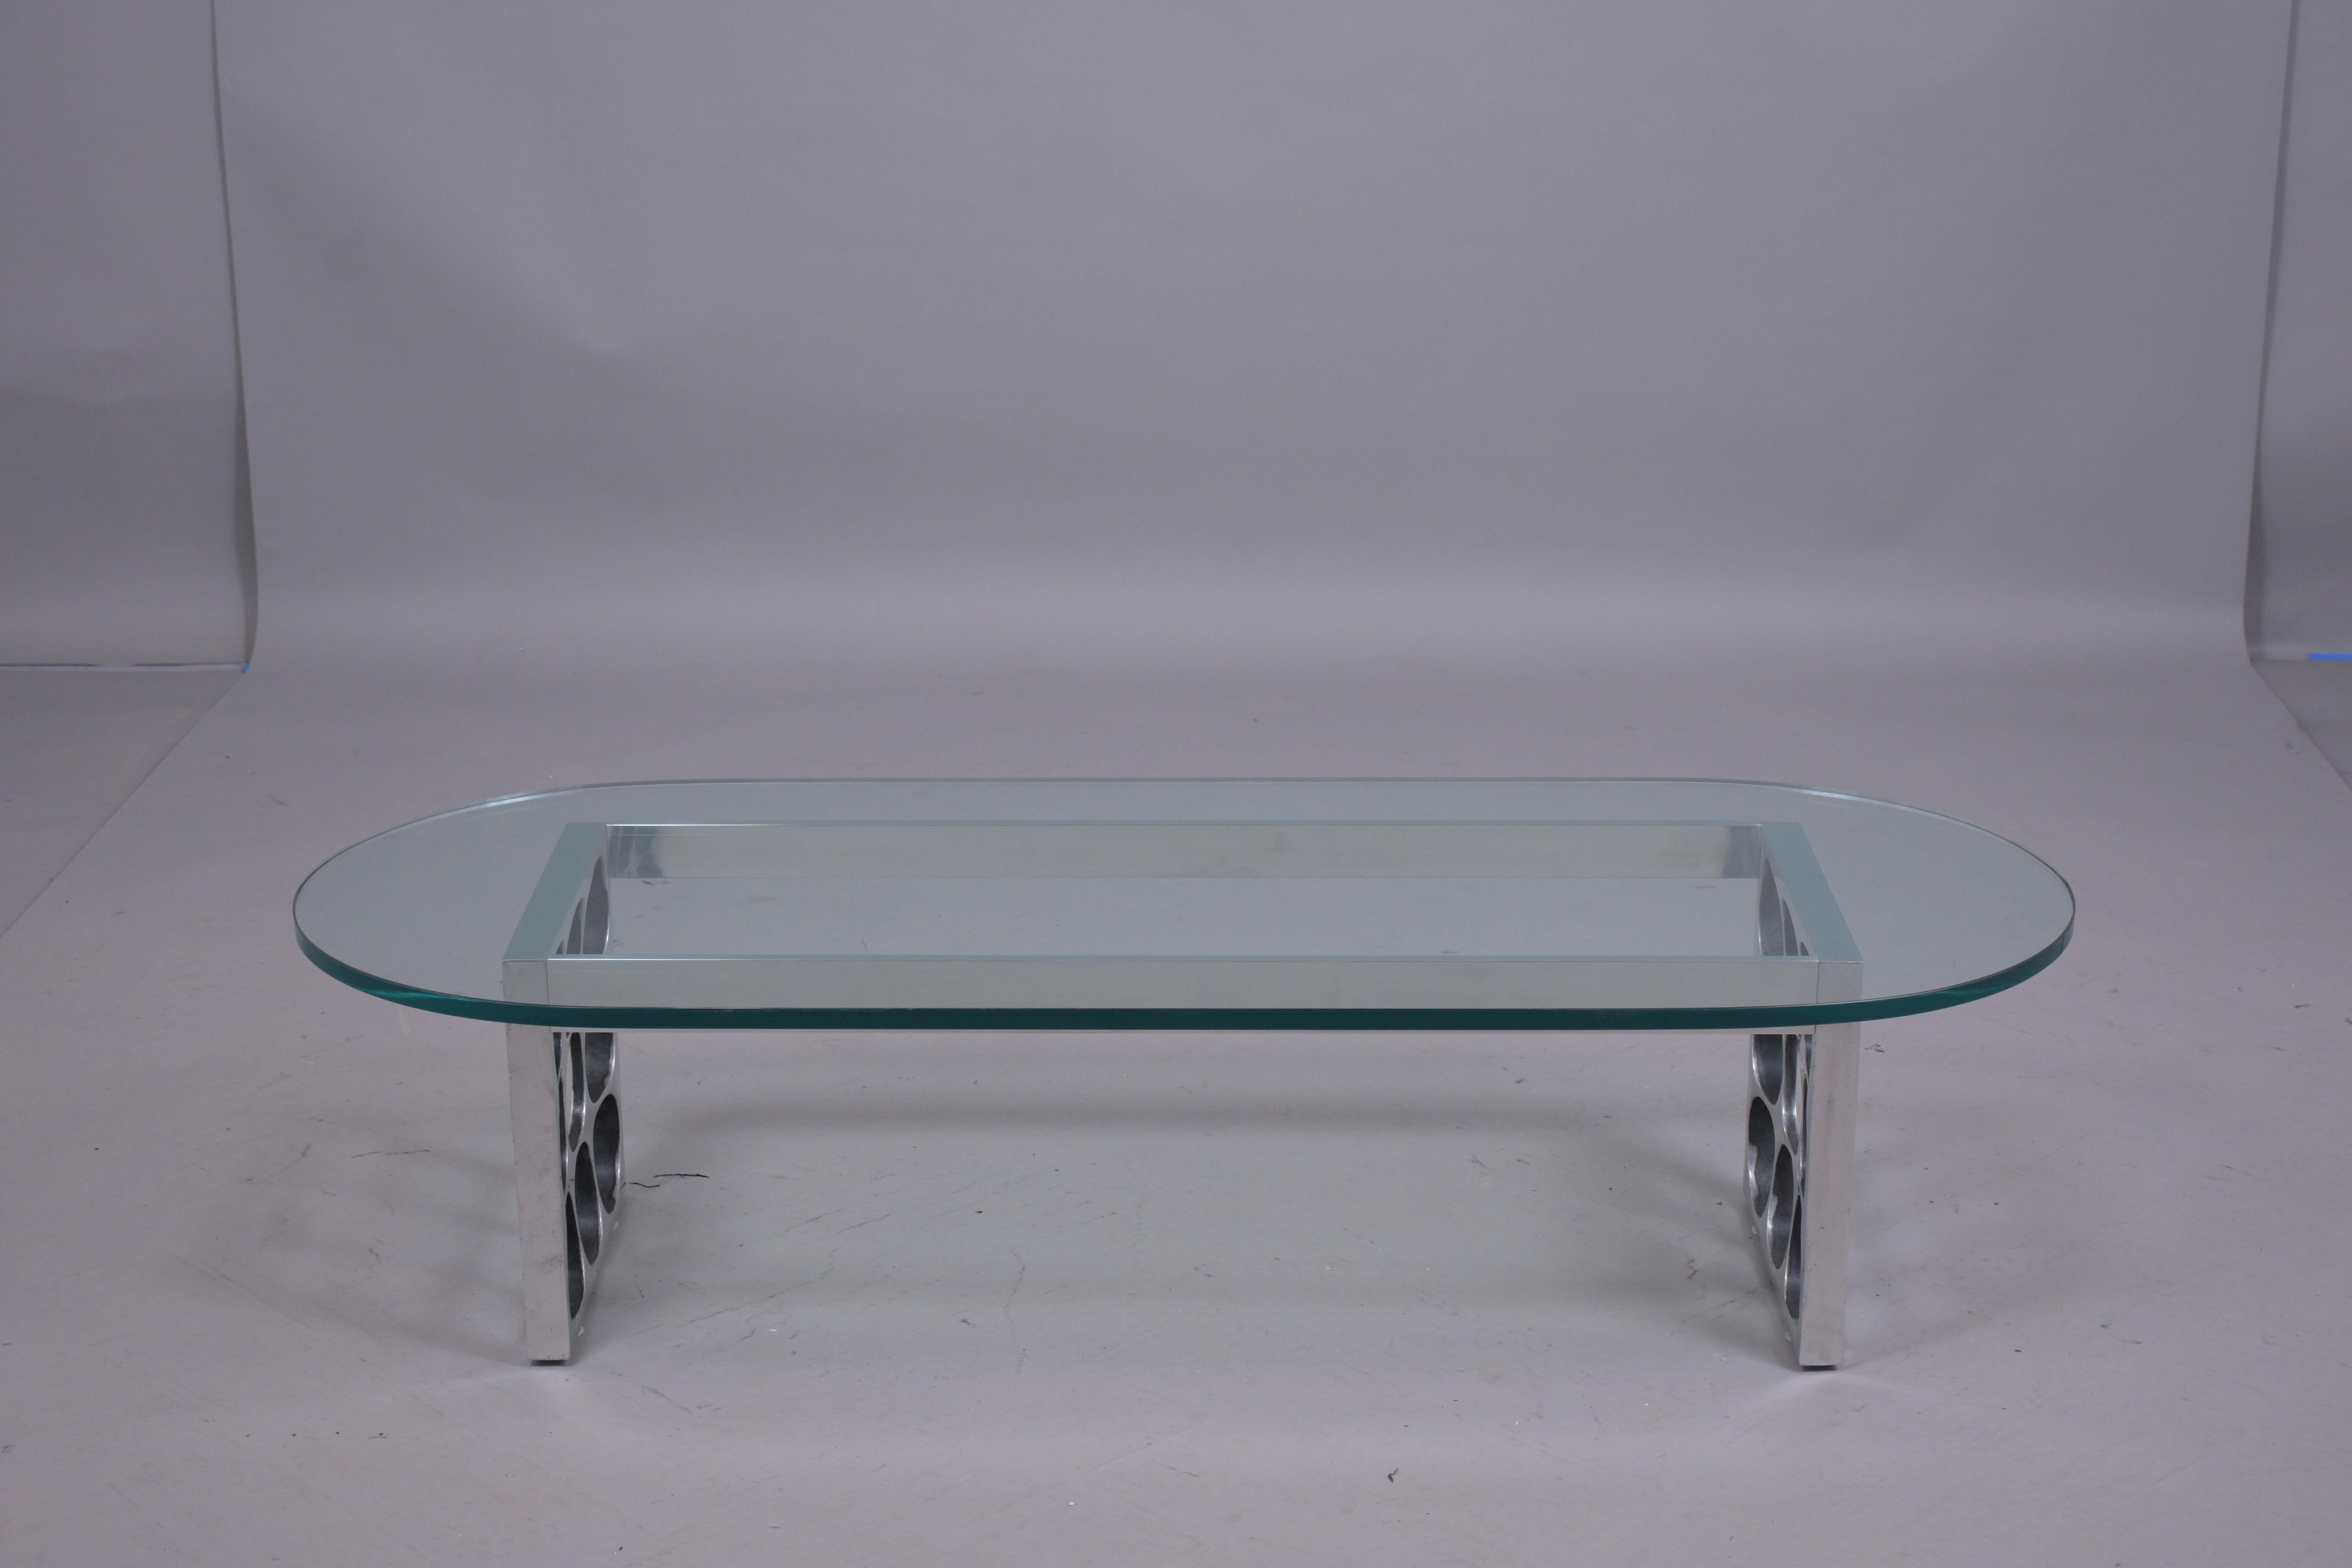 A mid-century modern metal glass coffee table in great condition that has been professionally restored by our team of expert craftsmen. This racetrack glass top table features a half-inch beveled oval clear glass in a good condition that sits on an